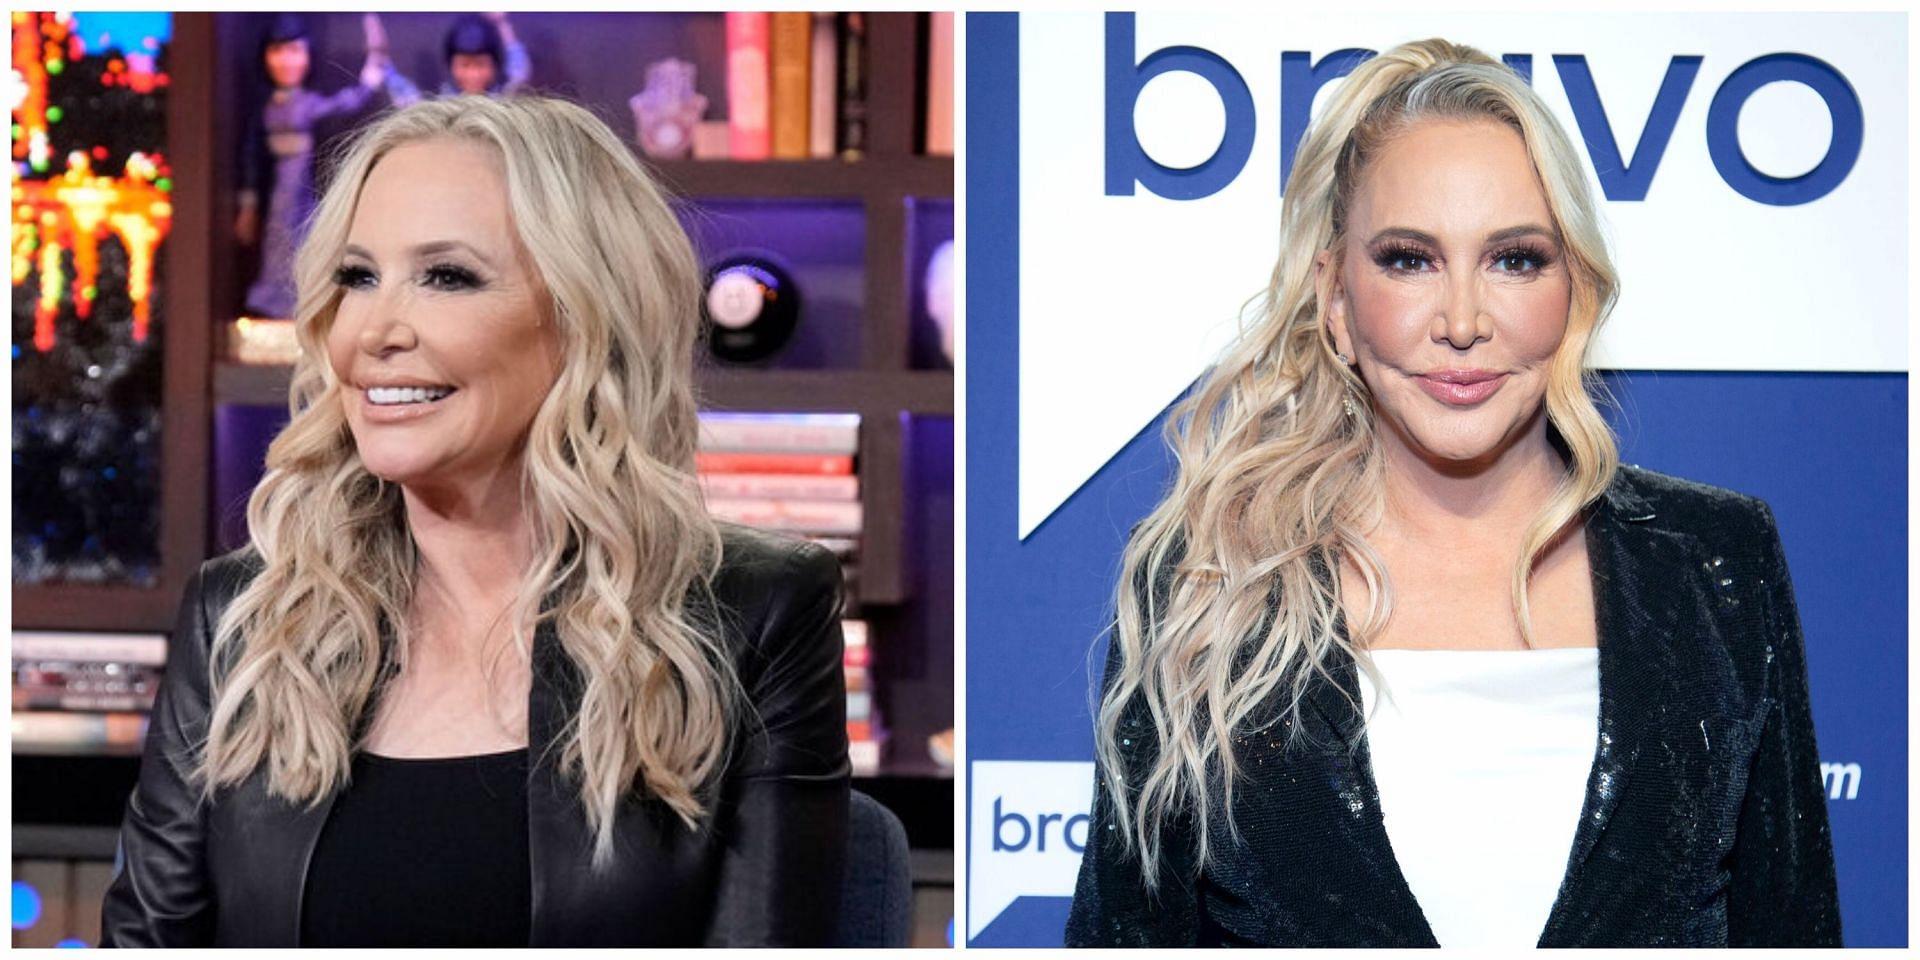 Shannon Beador to now pay for damages caused by hit and run case: More details about the case revealed. (Image via Getty Images)